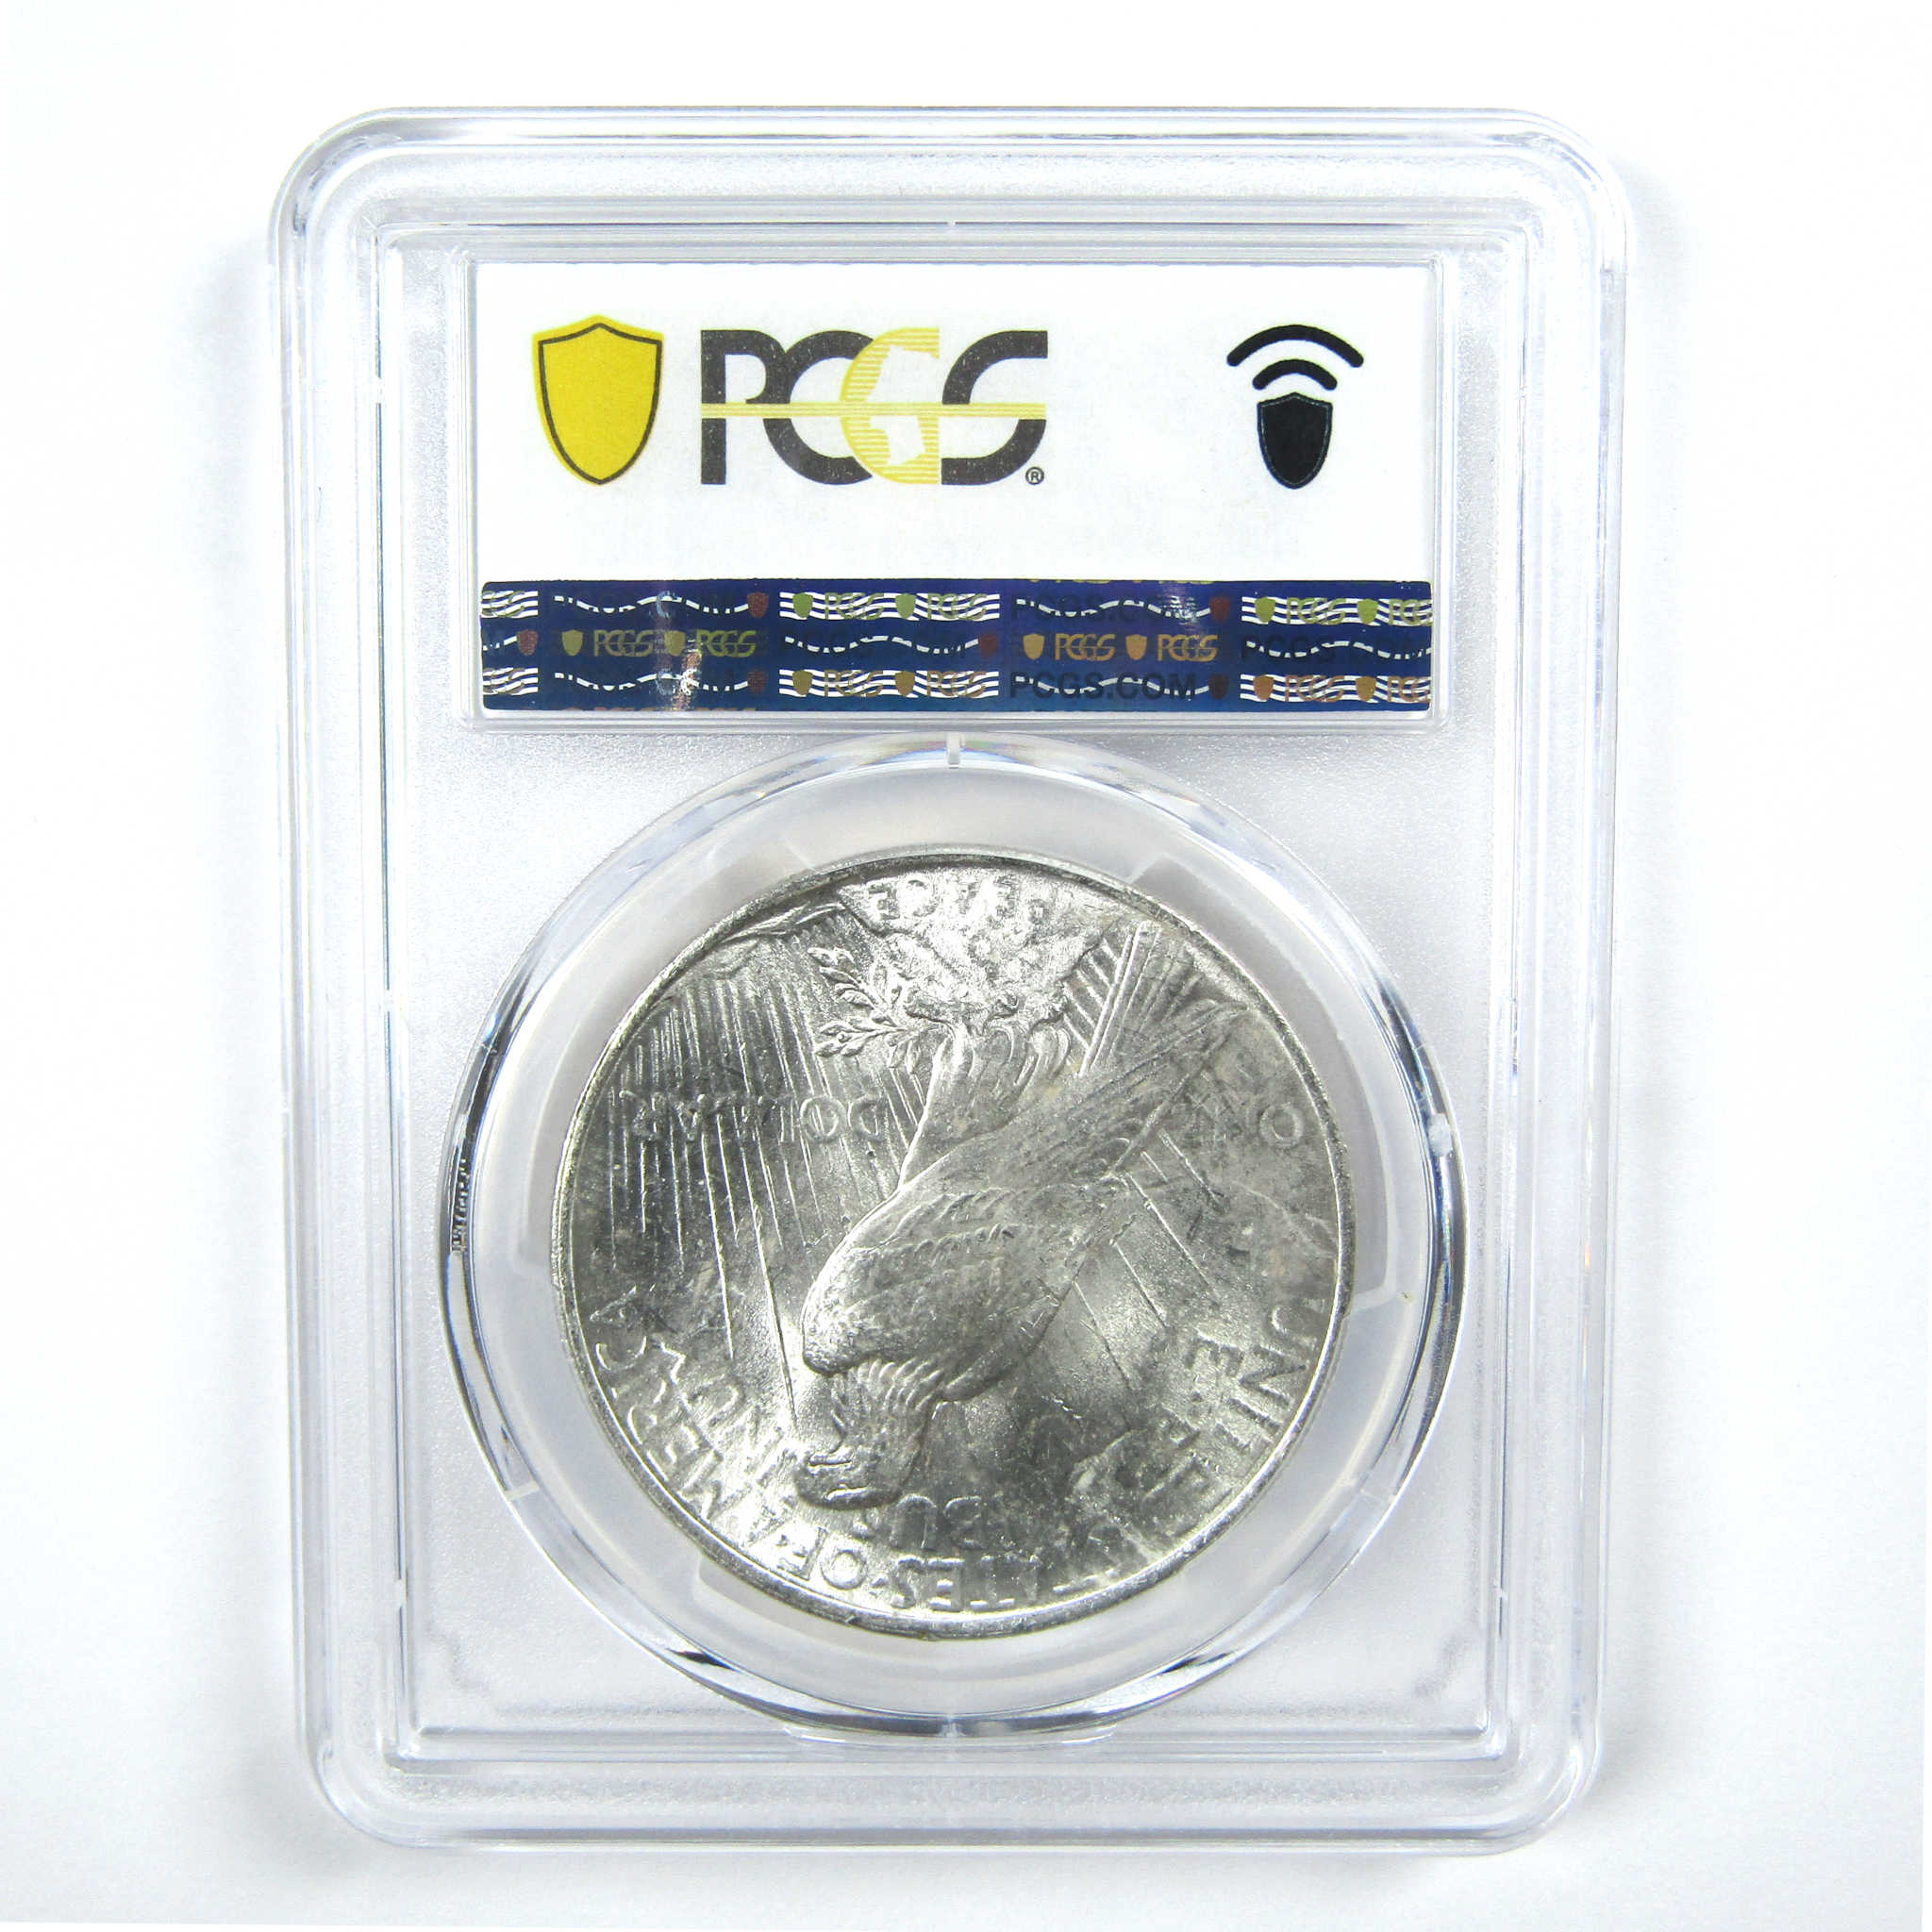 1924 Peace Dollar MS 63 PCGS Silver $1 Uncirculated Coin SKU:I13778